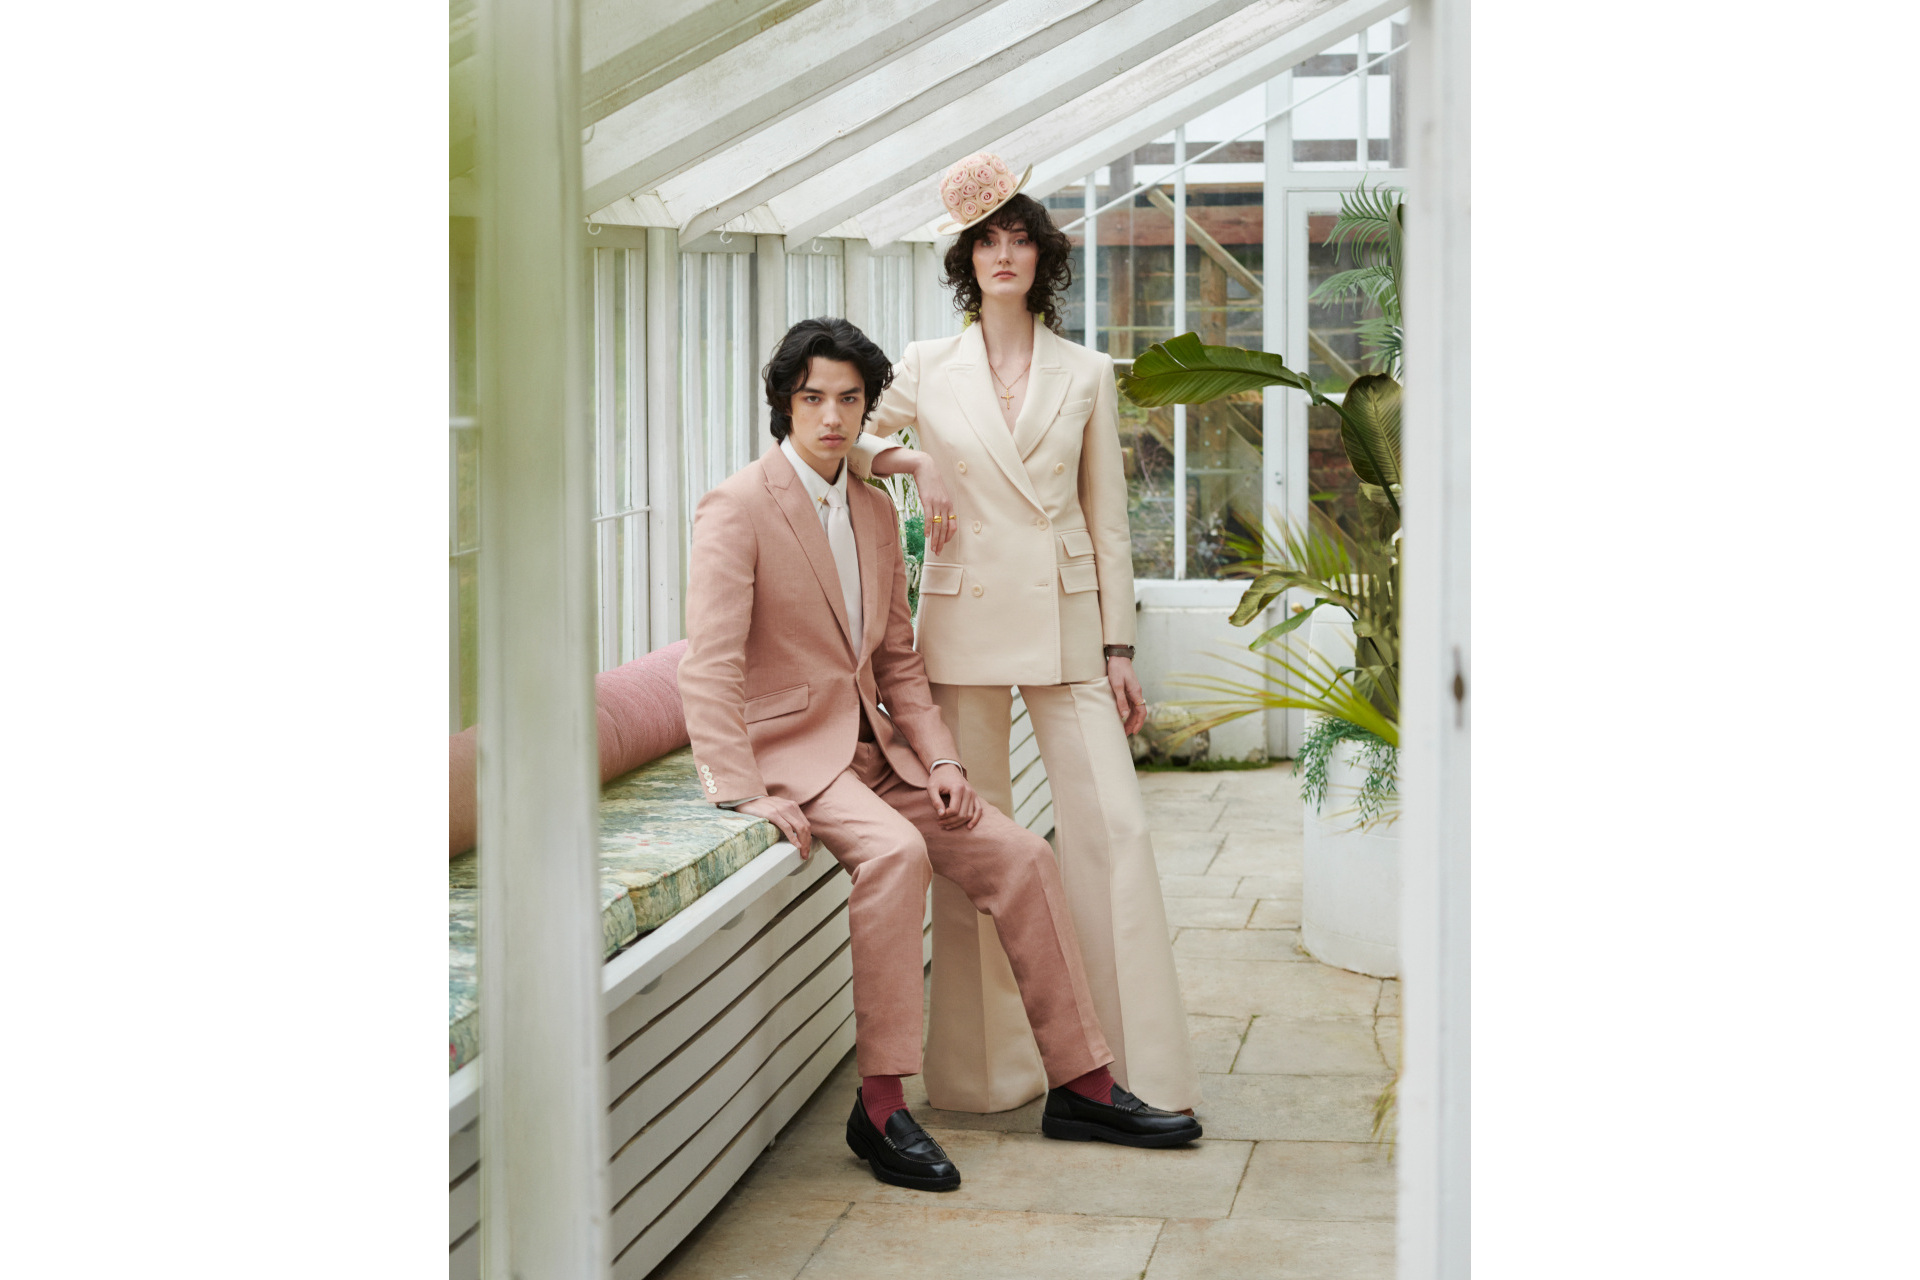 Man and woman in light pink suits in conservatory